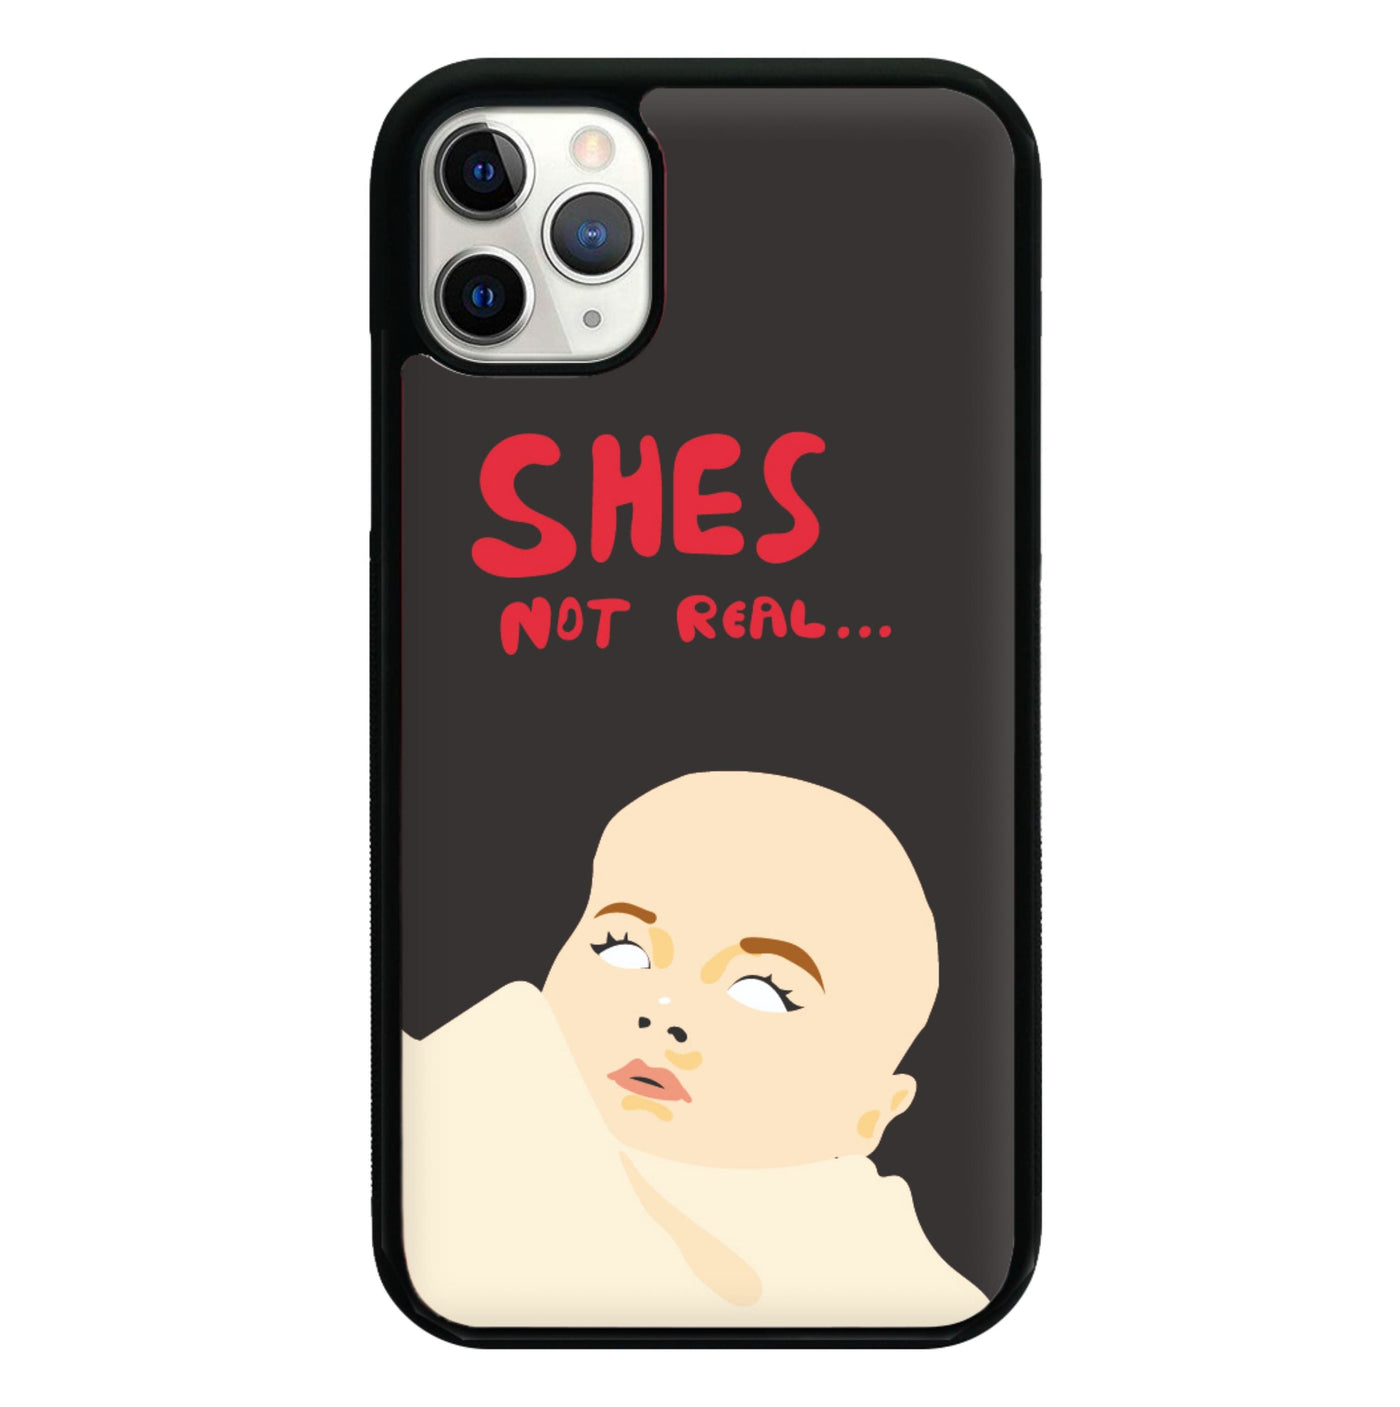 Shes not real - Twilight Phone Case